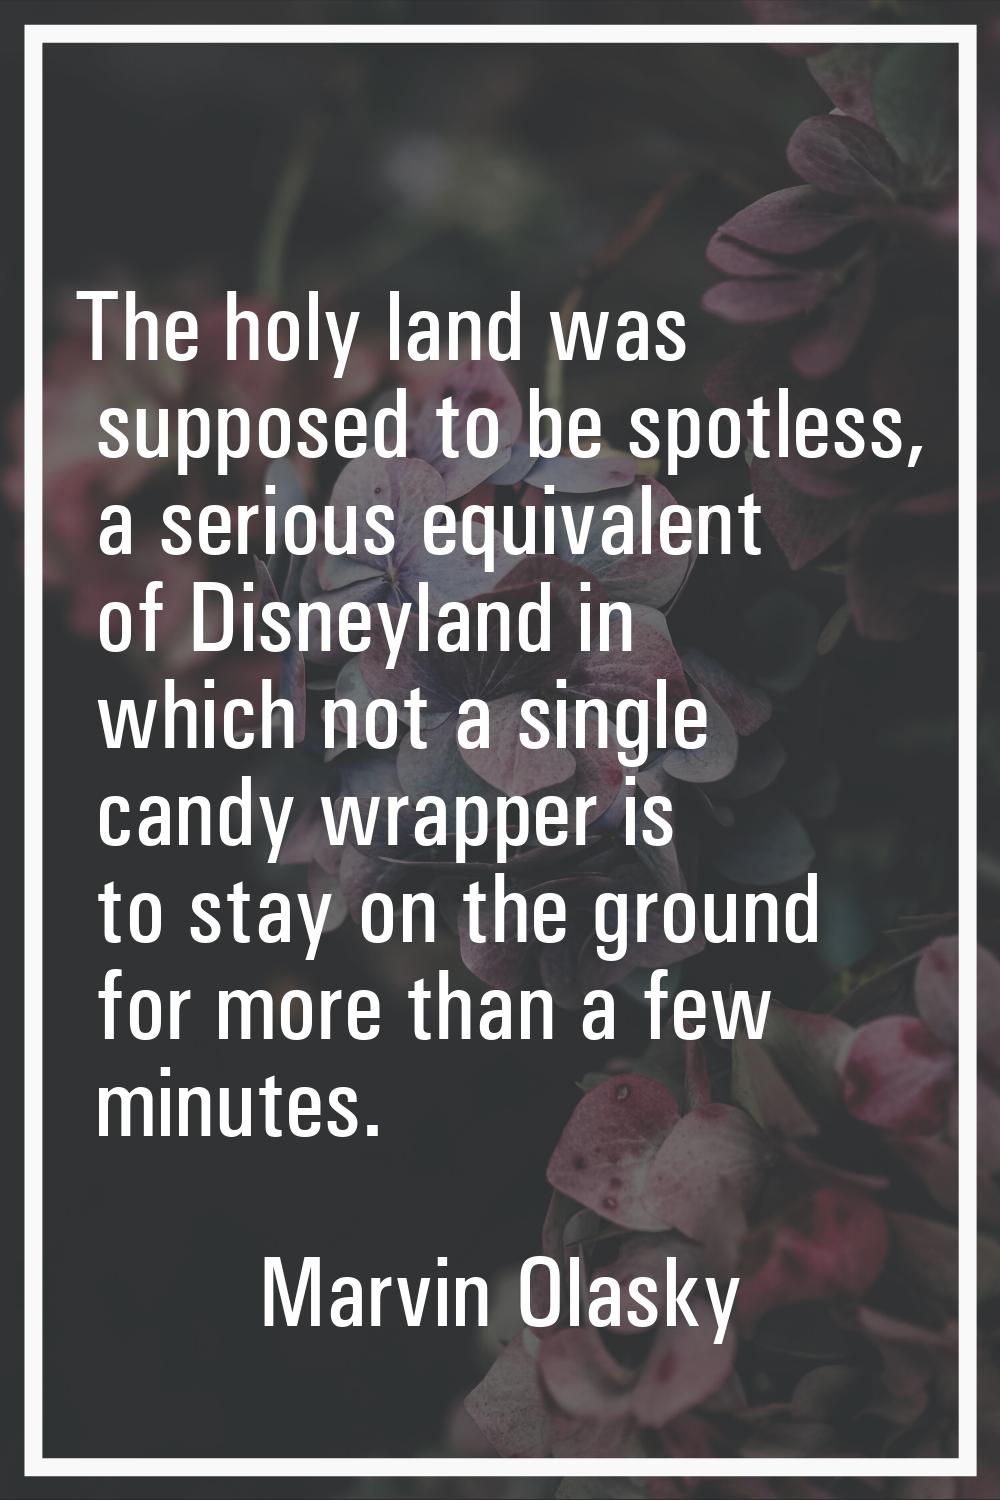 The holy land was supposed to be spotless, a serious equivalent of Disneyland in which not a single